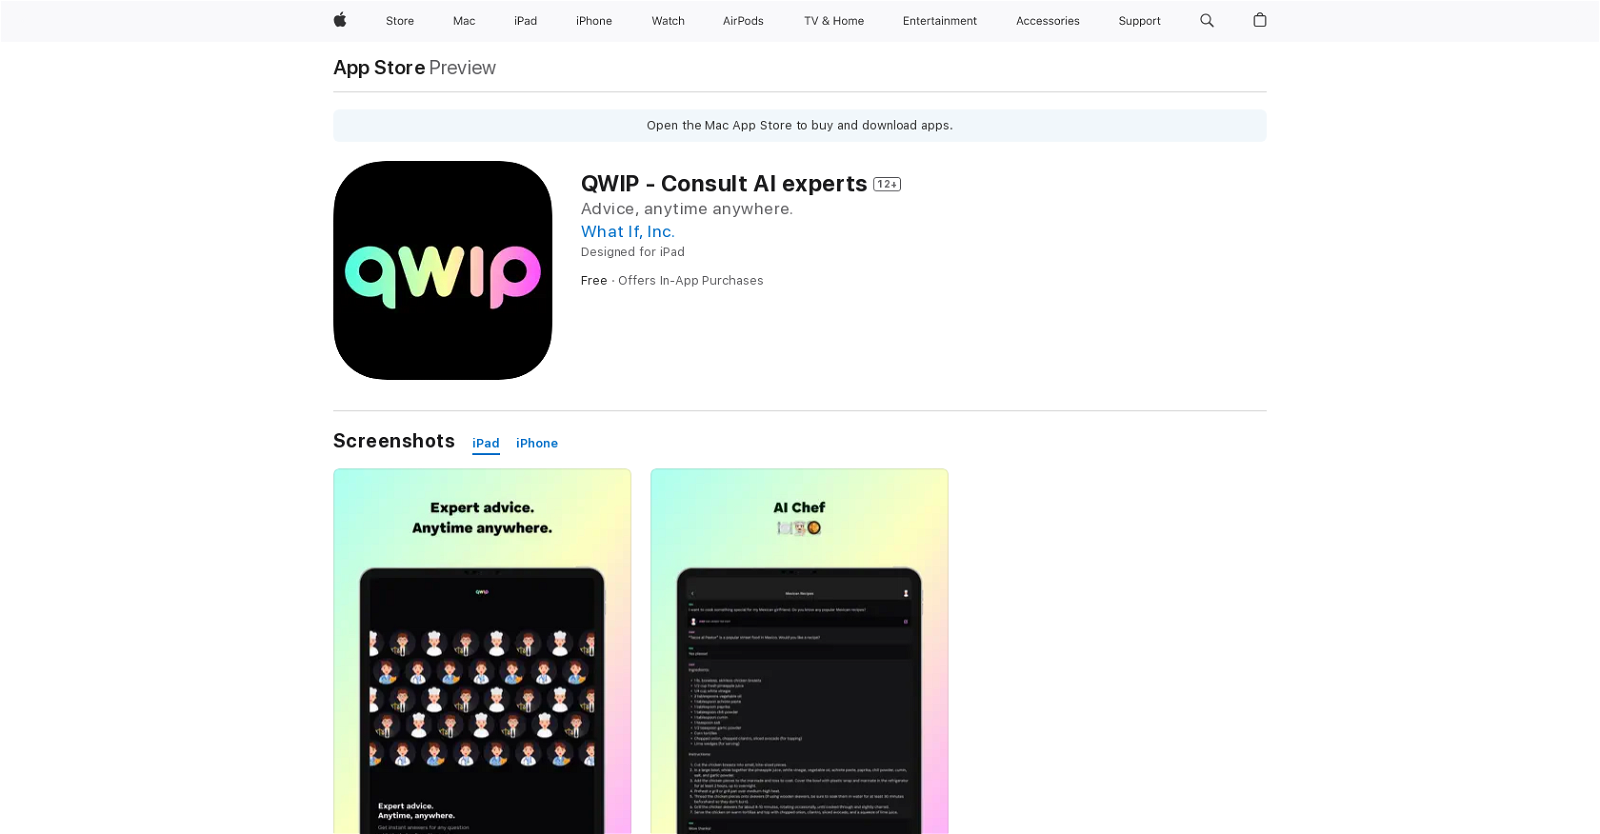 QWIP - Consult AI experts website